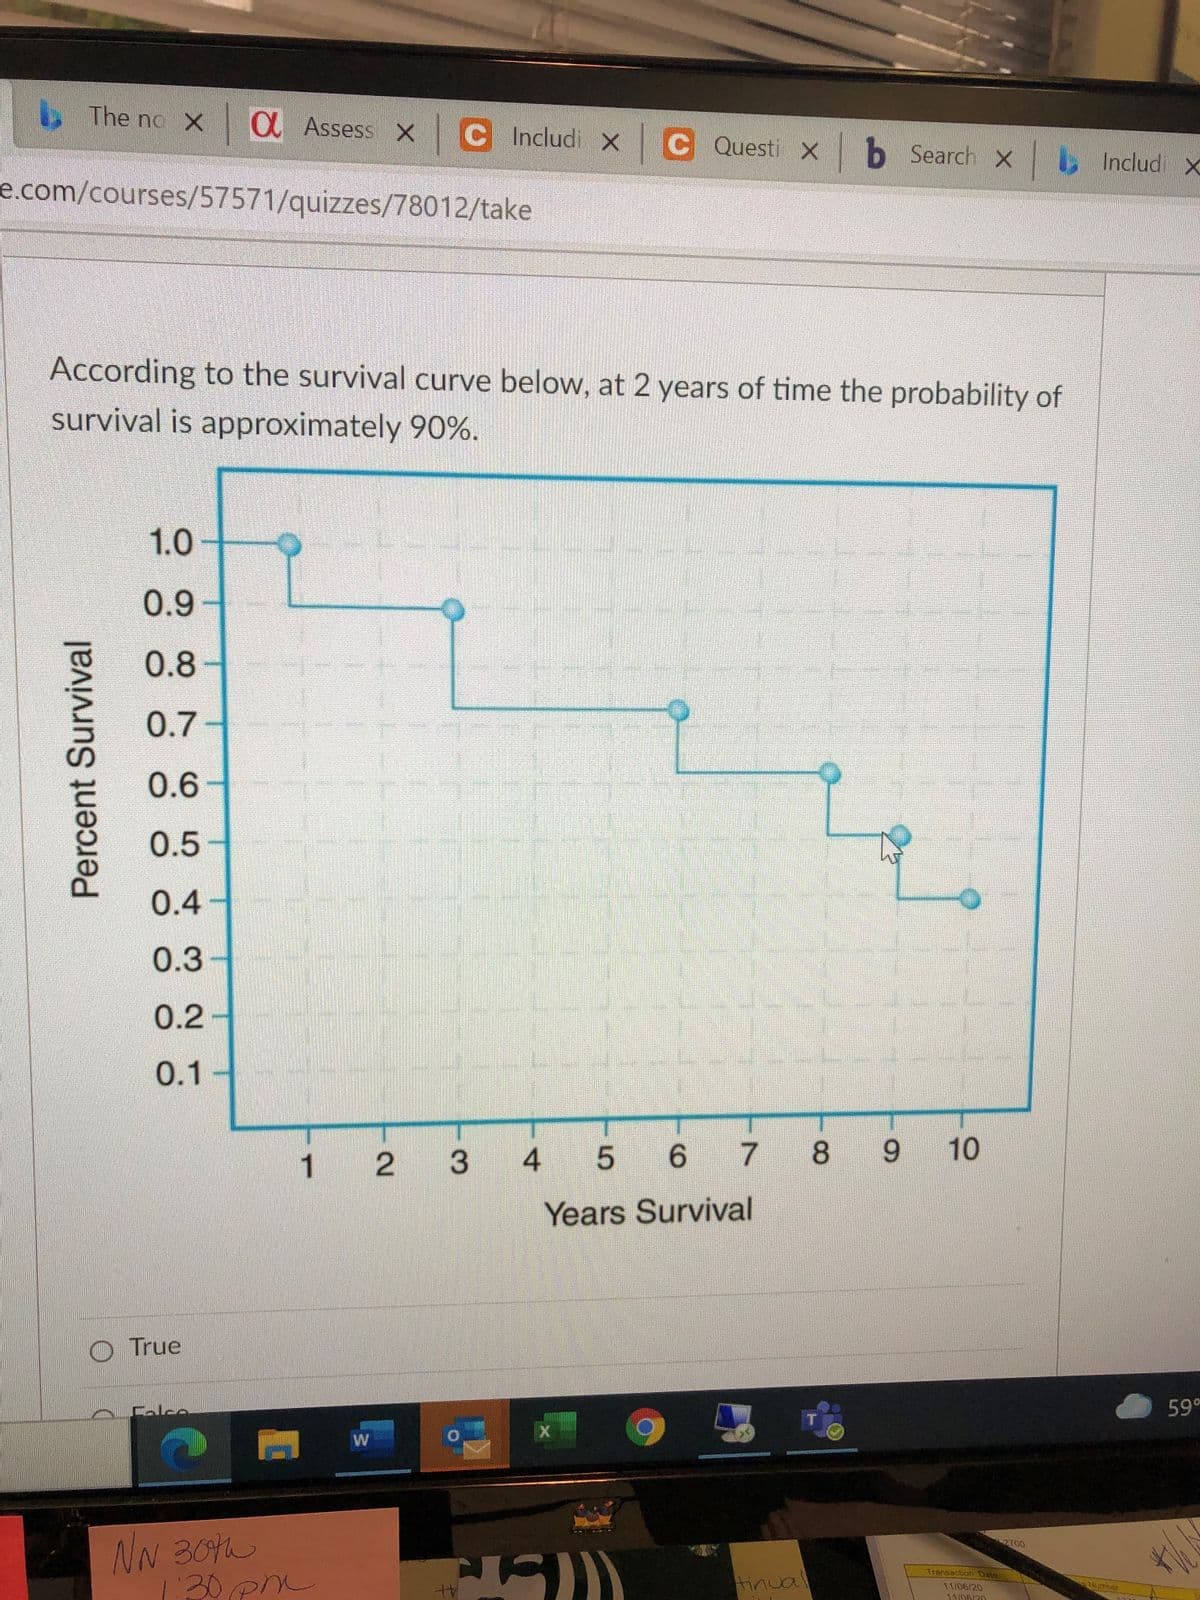 The no X
O Assess X
C Includi X
C Questi X
|b Search x
b
Includ X
e.com/courses/57571/quizzes/78012/take
According to the survival curve below, at 2 years of time the probability of
survival is approximately 90%.
1.0
0.9-
0.8
0.7
0.6
0.5
0.4
0.3
0.2
0.1-
1
2
4
5 6
7 8
10
Years Survival
O True
Calce
59°
W
NN 30h
130 p
2700
Transaction Dale
tinual
Number
11/06/20
11/06/20
Percent Survival
